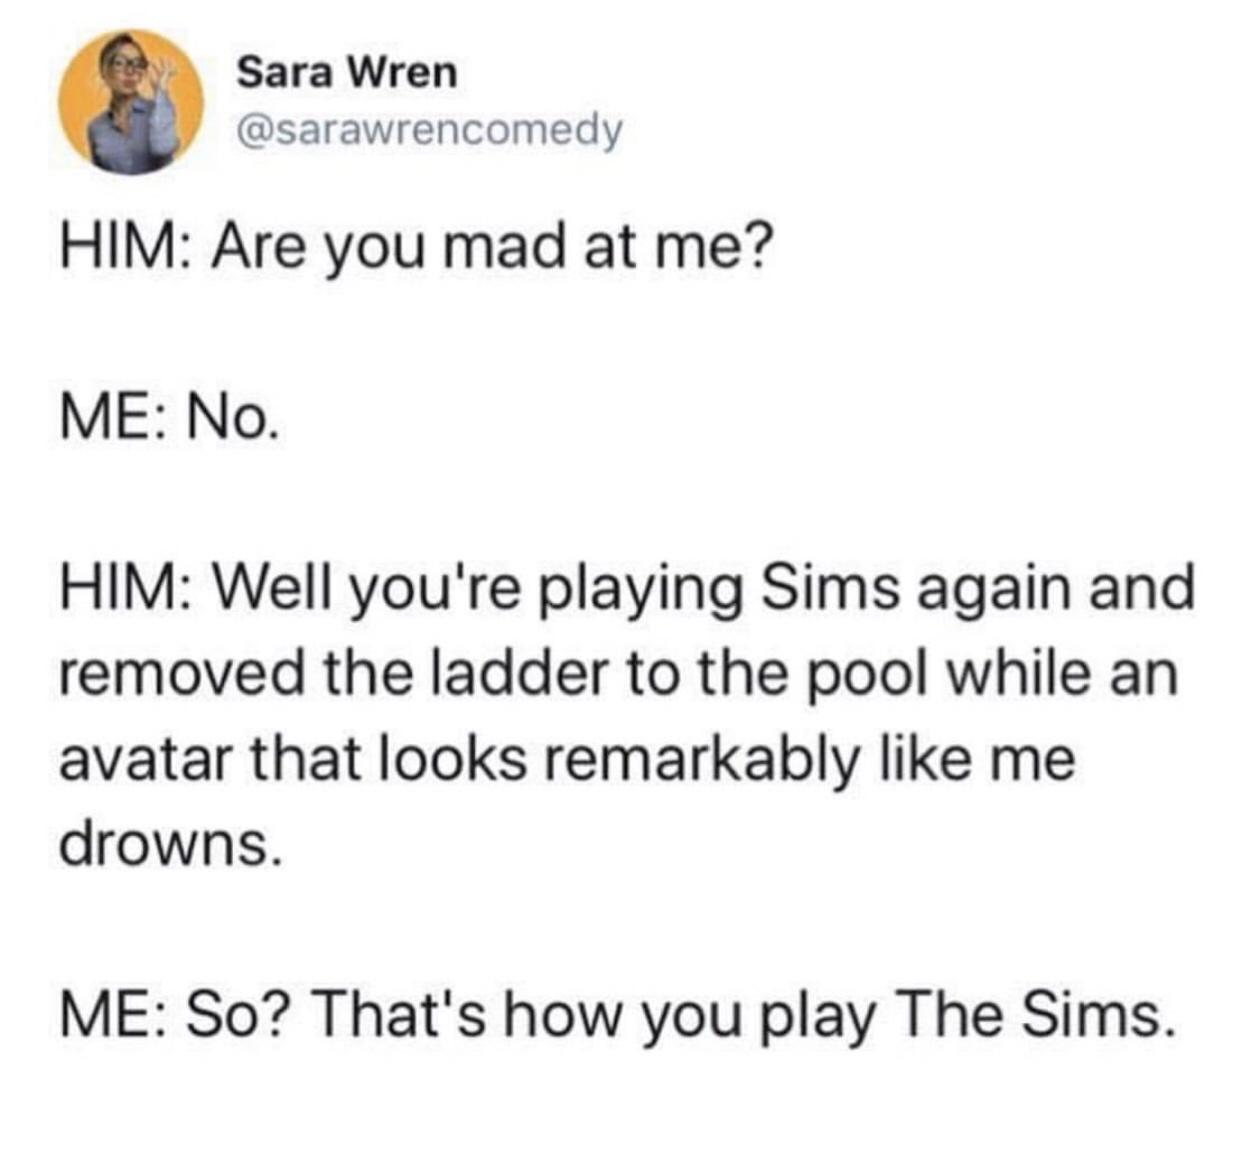 funny pics and randoms - paper - Sara Wren Him Are you mad at me? Me No. Him Well you're playing Sims again and removed the ladder to the pool while an avatar that looks remarkably me drowns. Me So? That's how you play The Sims.